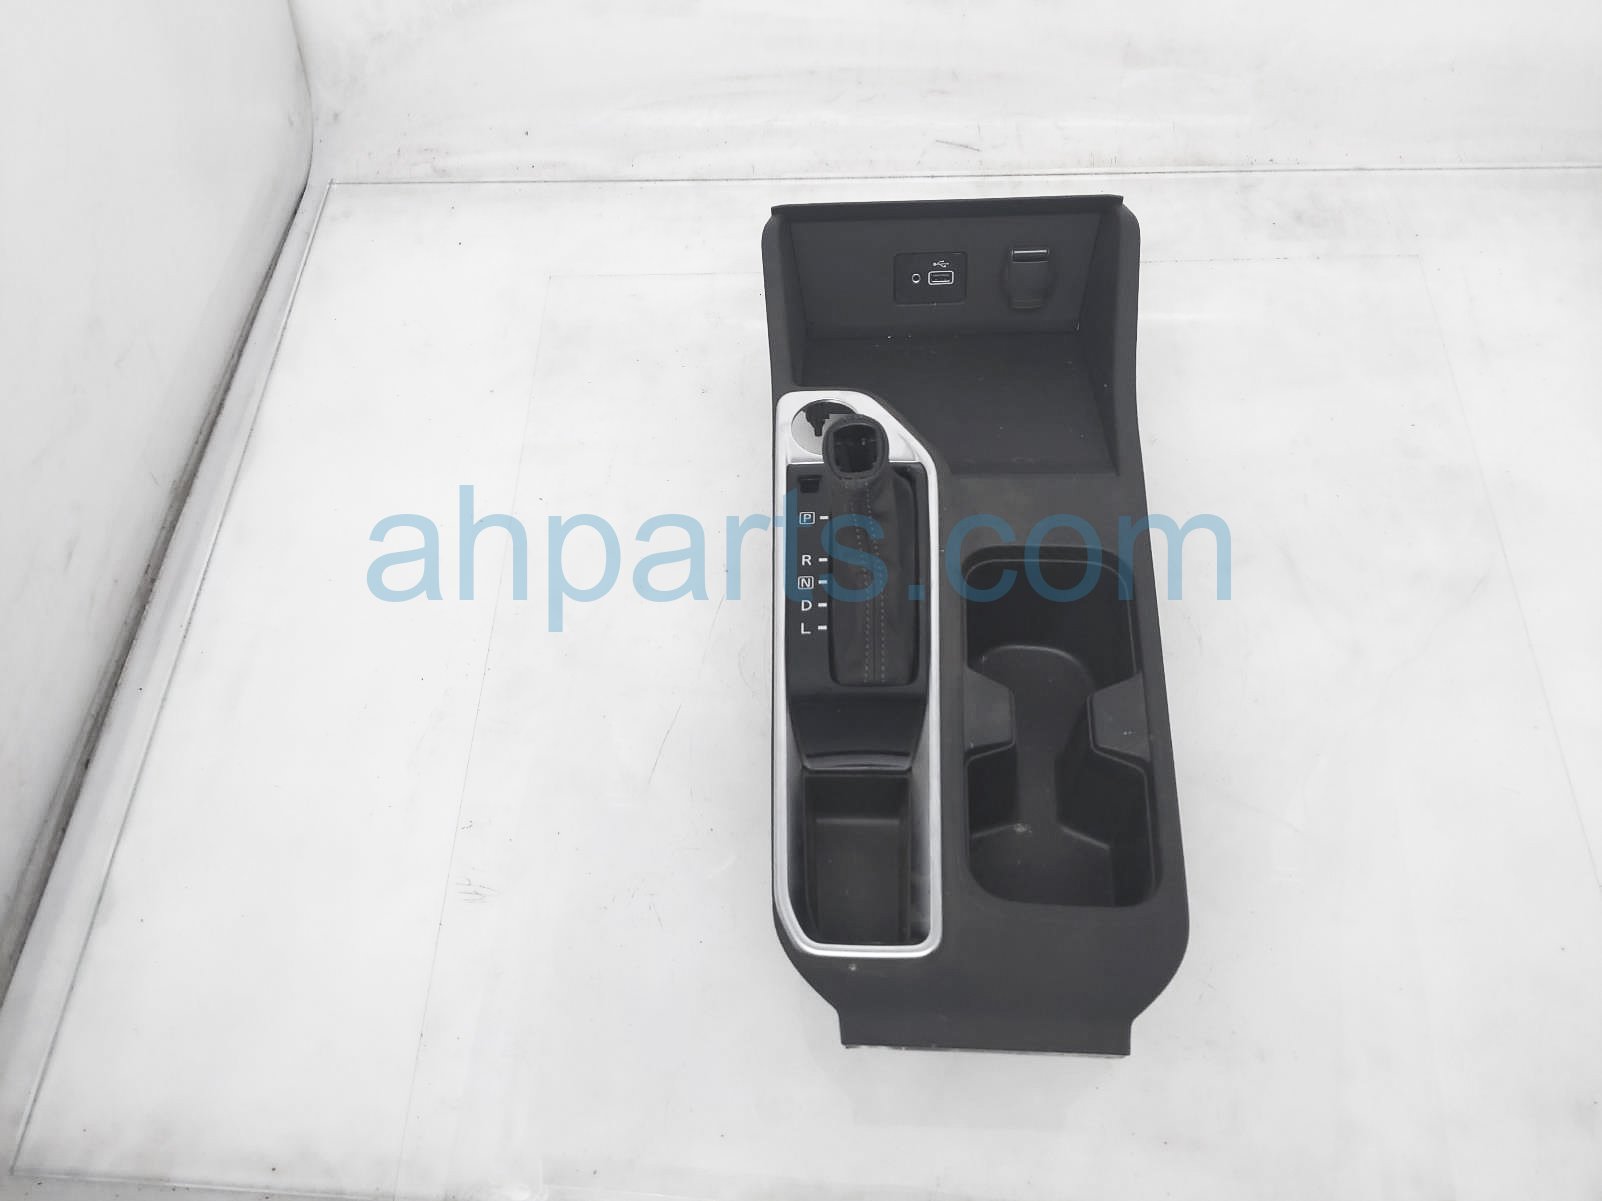 $119 Nissan CONSOLE TRIM  W/ CUP HOLDER ASSY